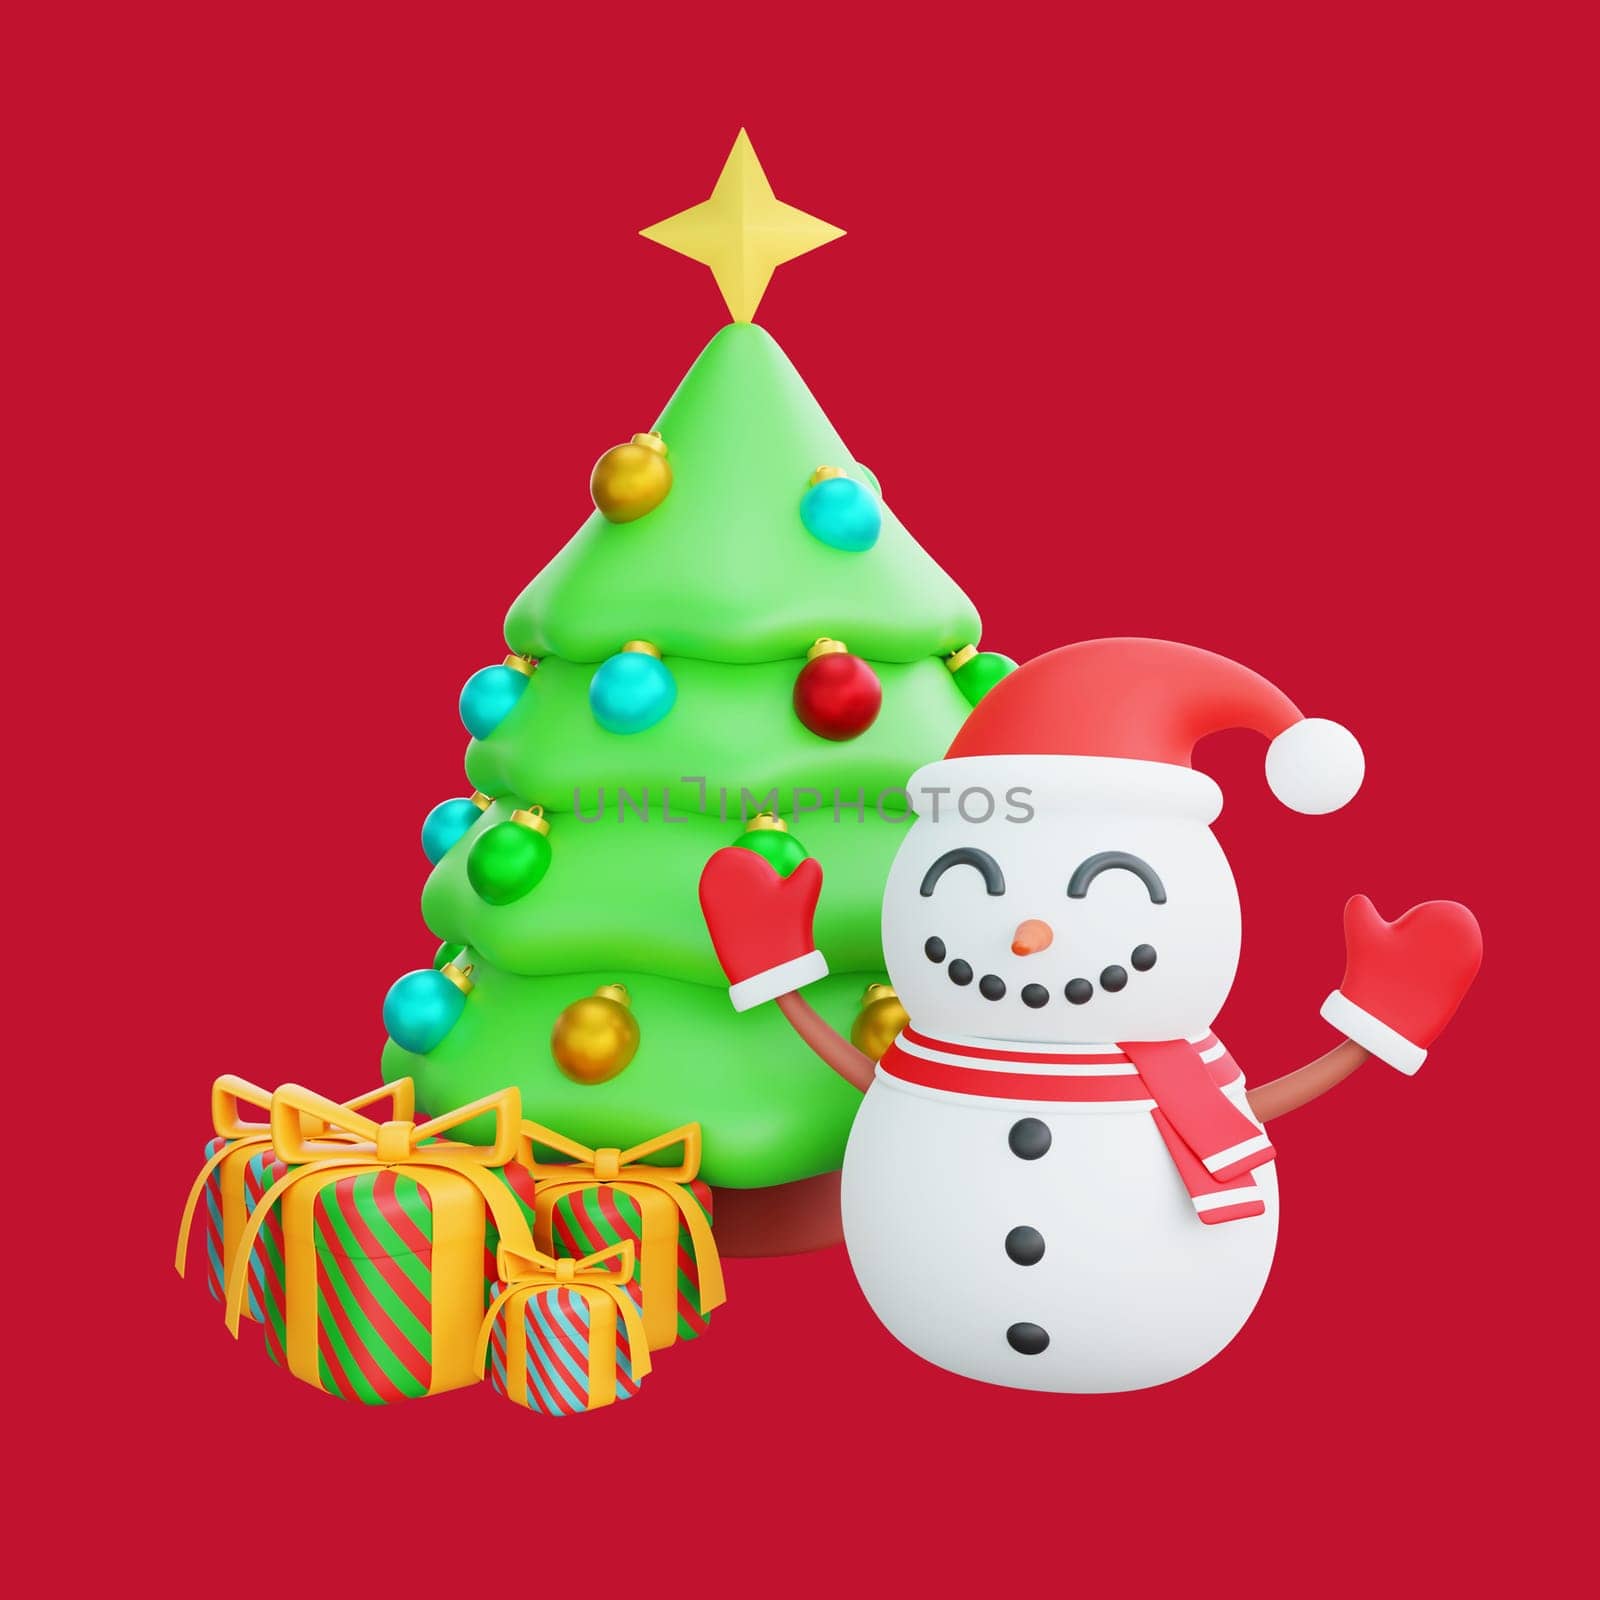 3D illustration of Christmas Tree and Snowman with Gifts. Christmas decoration design by Rahmat_Djayusman